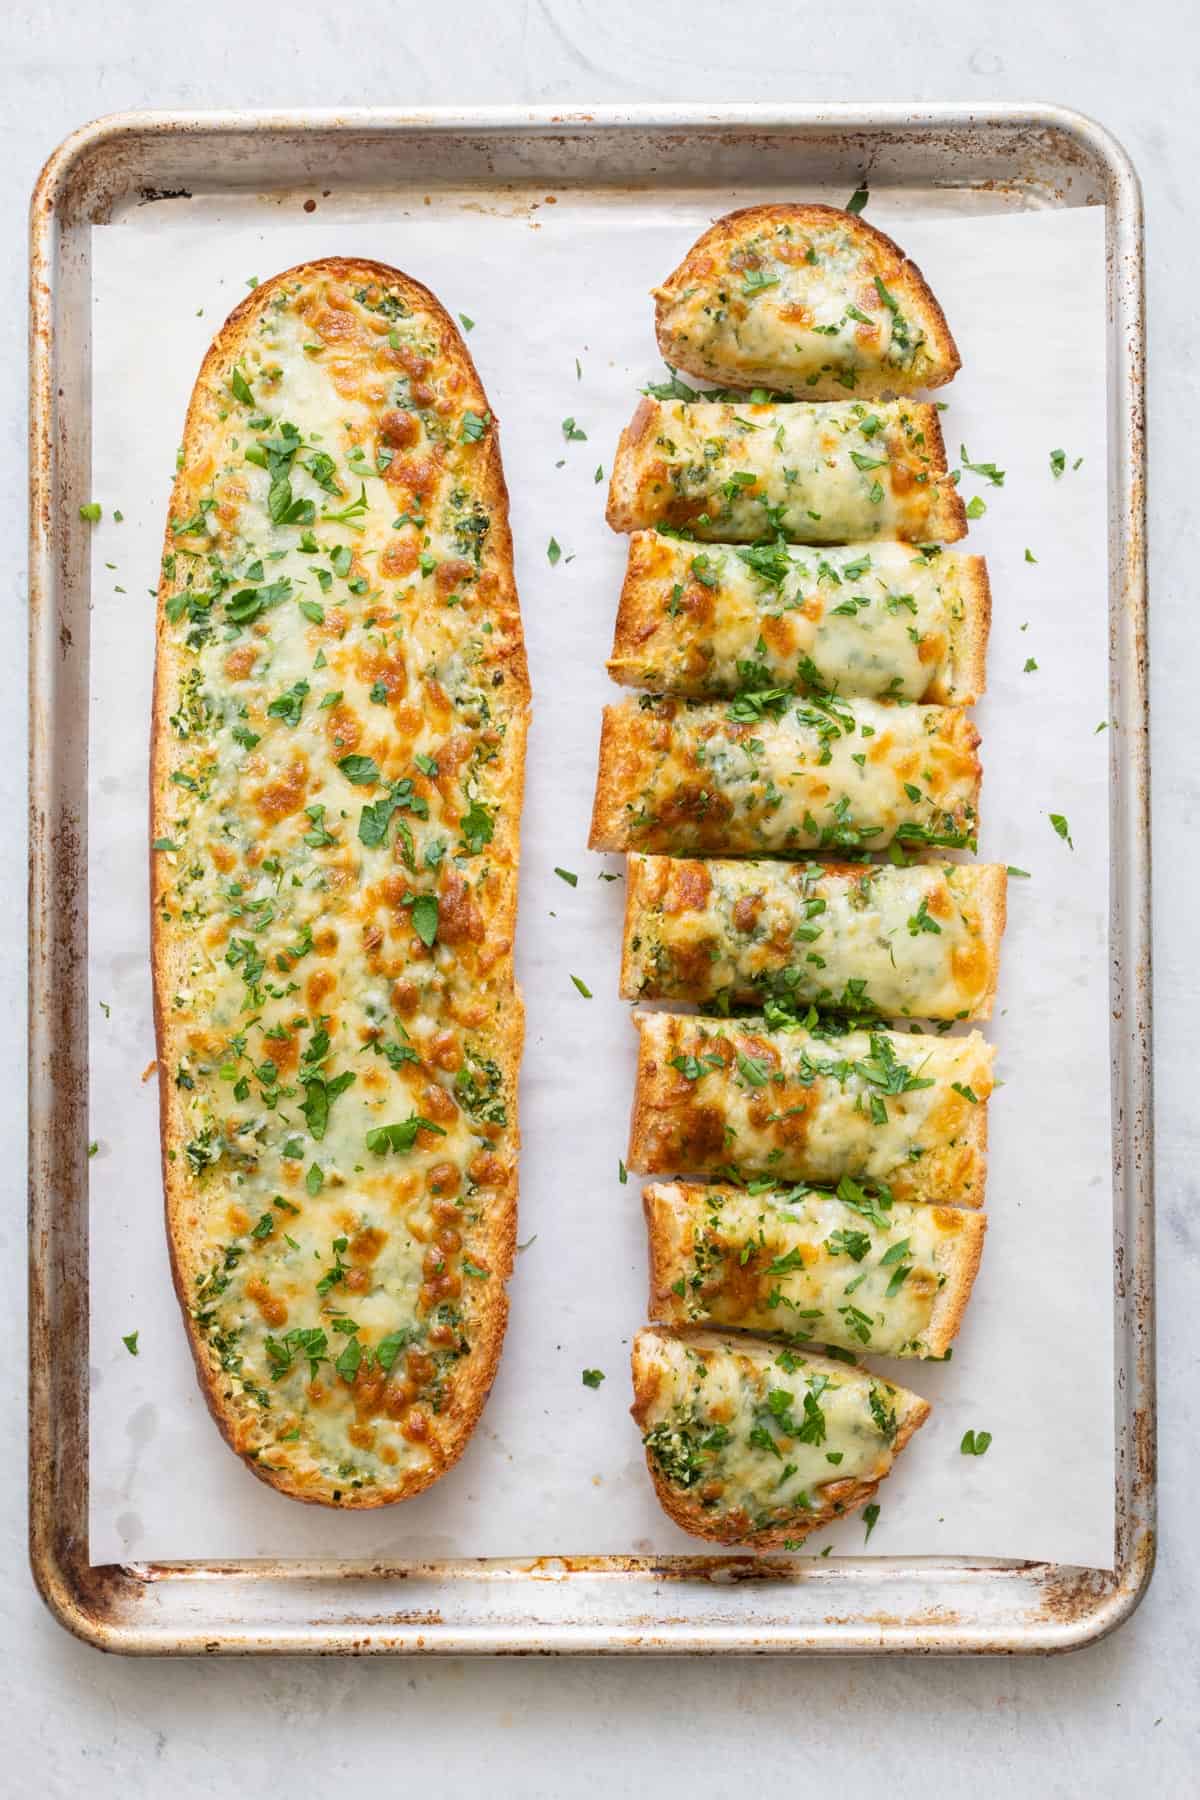 This Olive Oil And Herbs Garlic Bread is a slam dunk recipe for any Italian-themed dinners. It's simple to make and goes perfectly with soups and pastas!